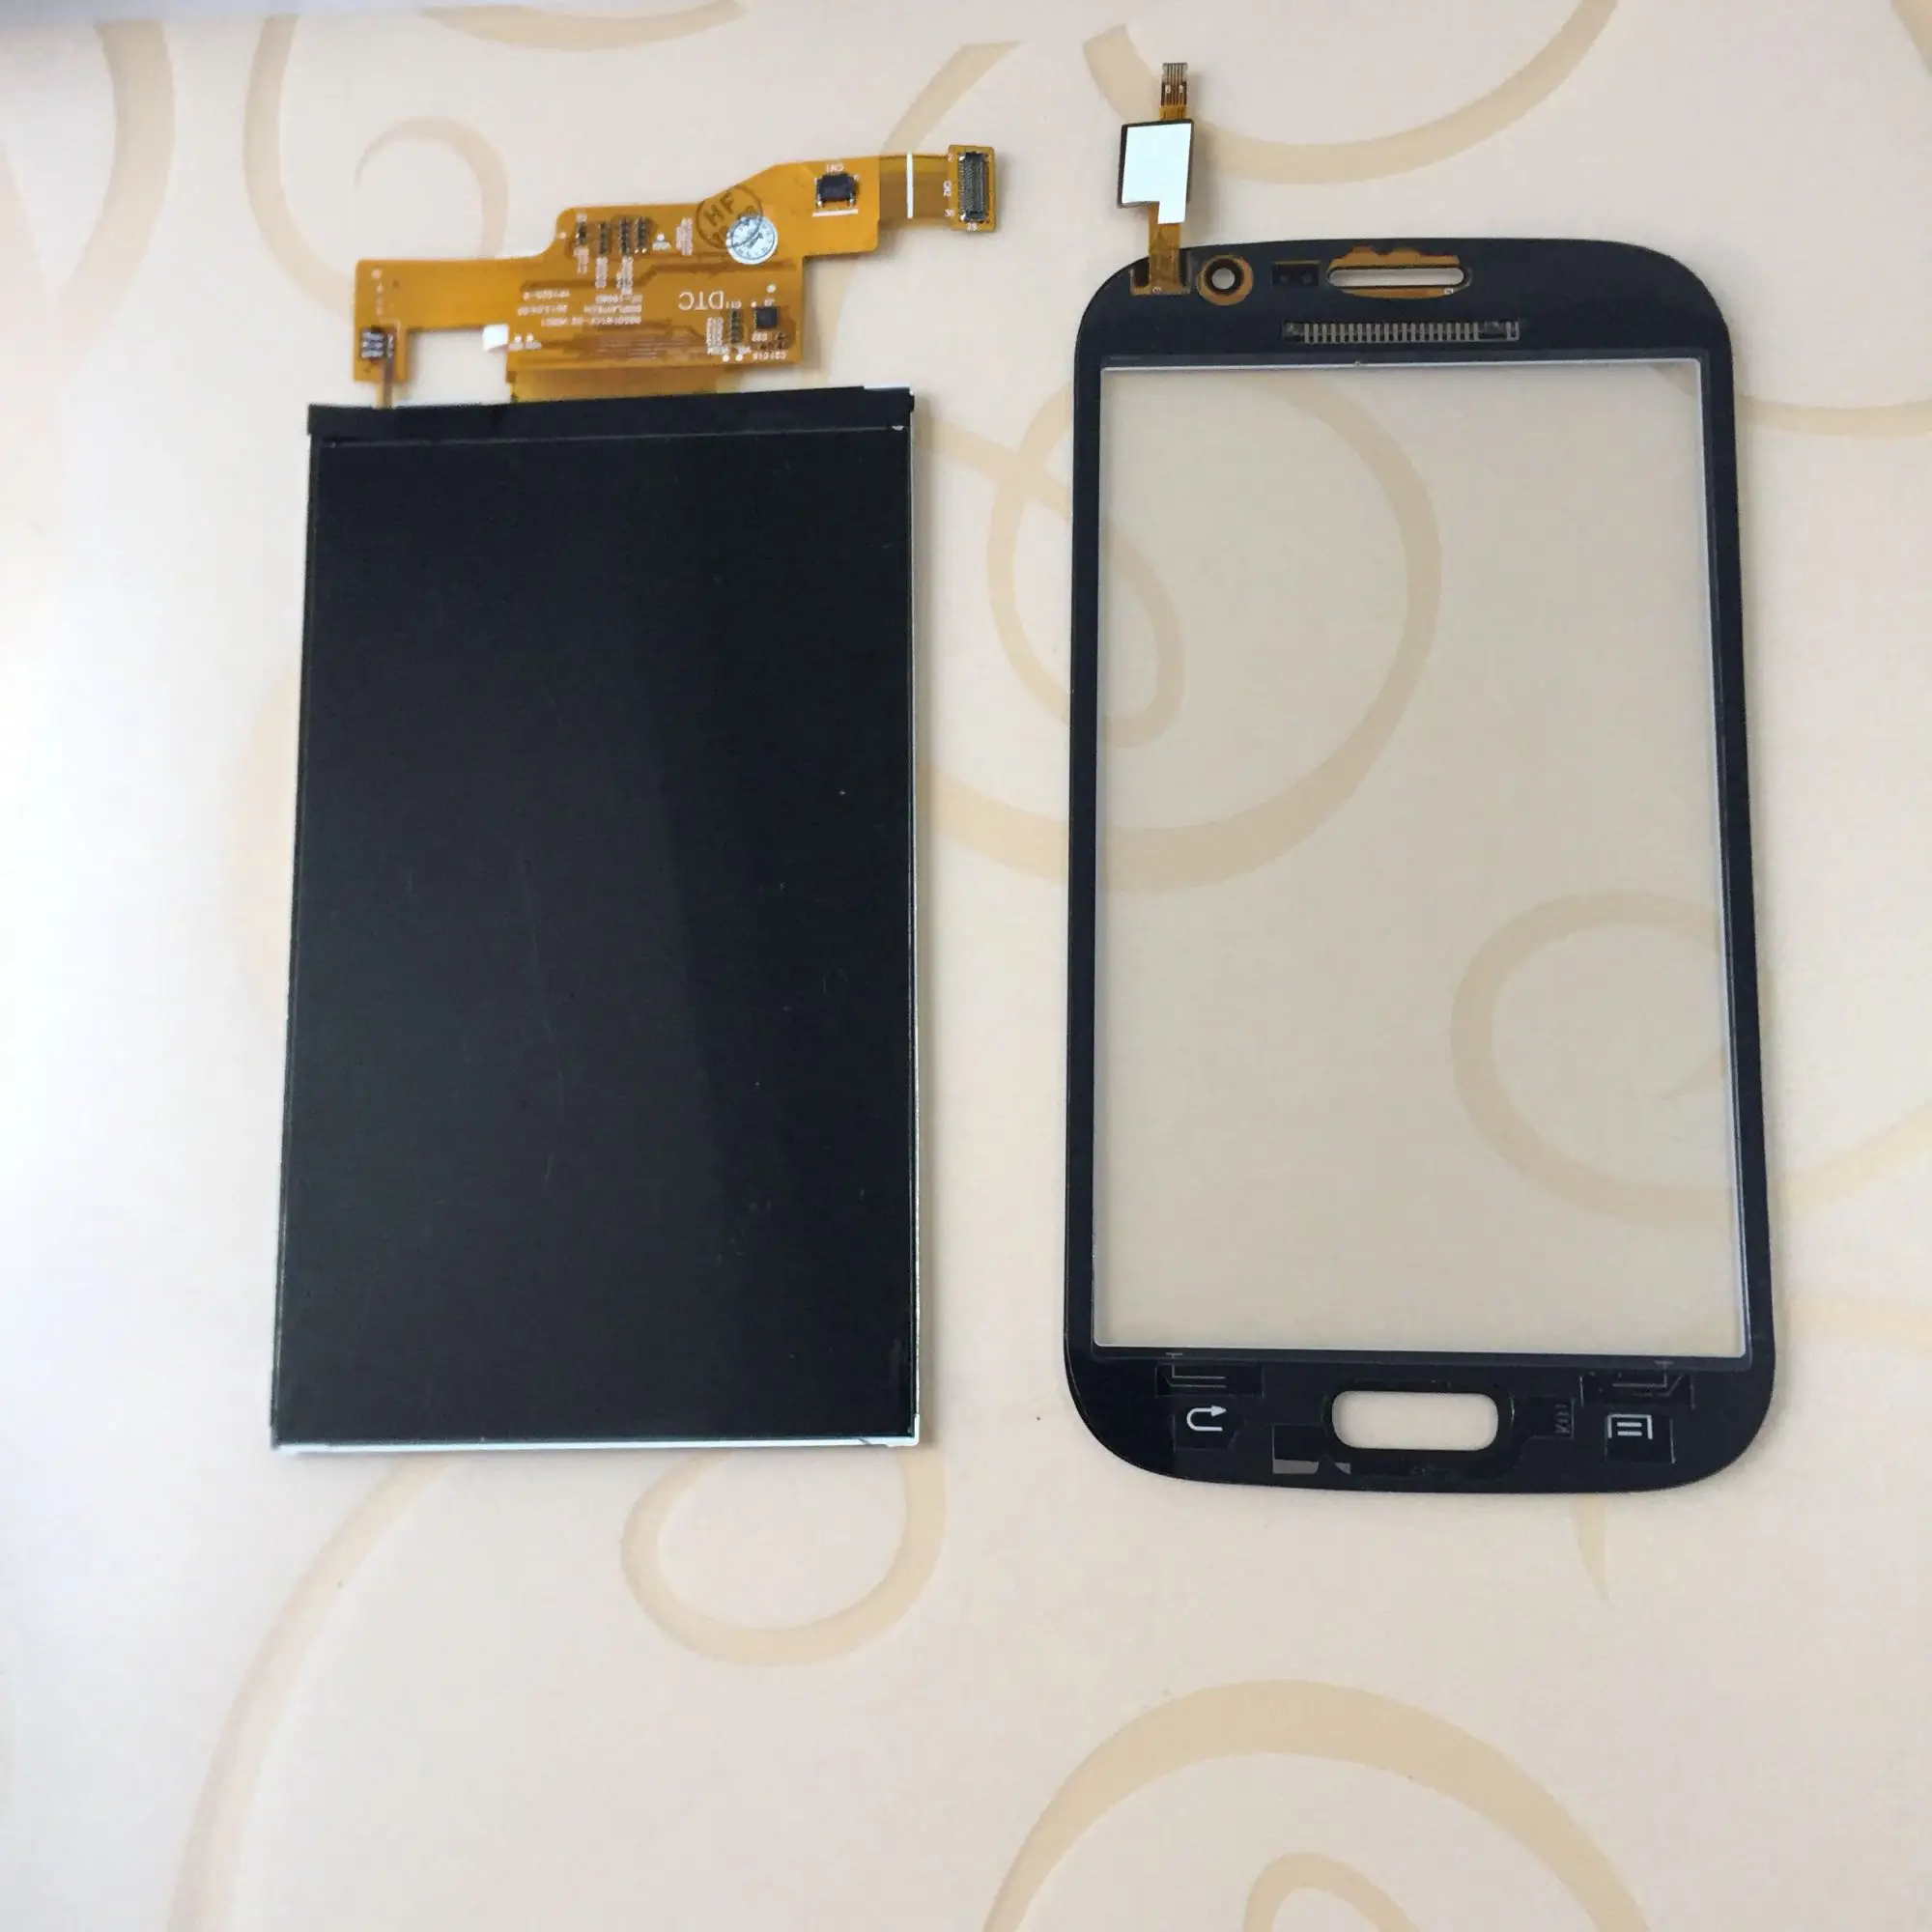 For Samsung Galaxy Grand Duos i9082 GT-I9082 i9080 GT-I9080 Touch Screen Digitizer Sensor+ LCD Display Monitor Screen Panel